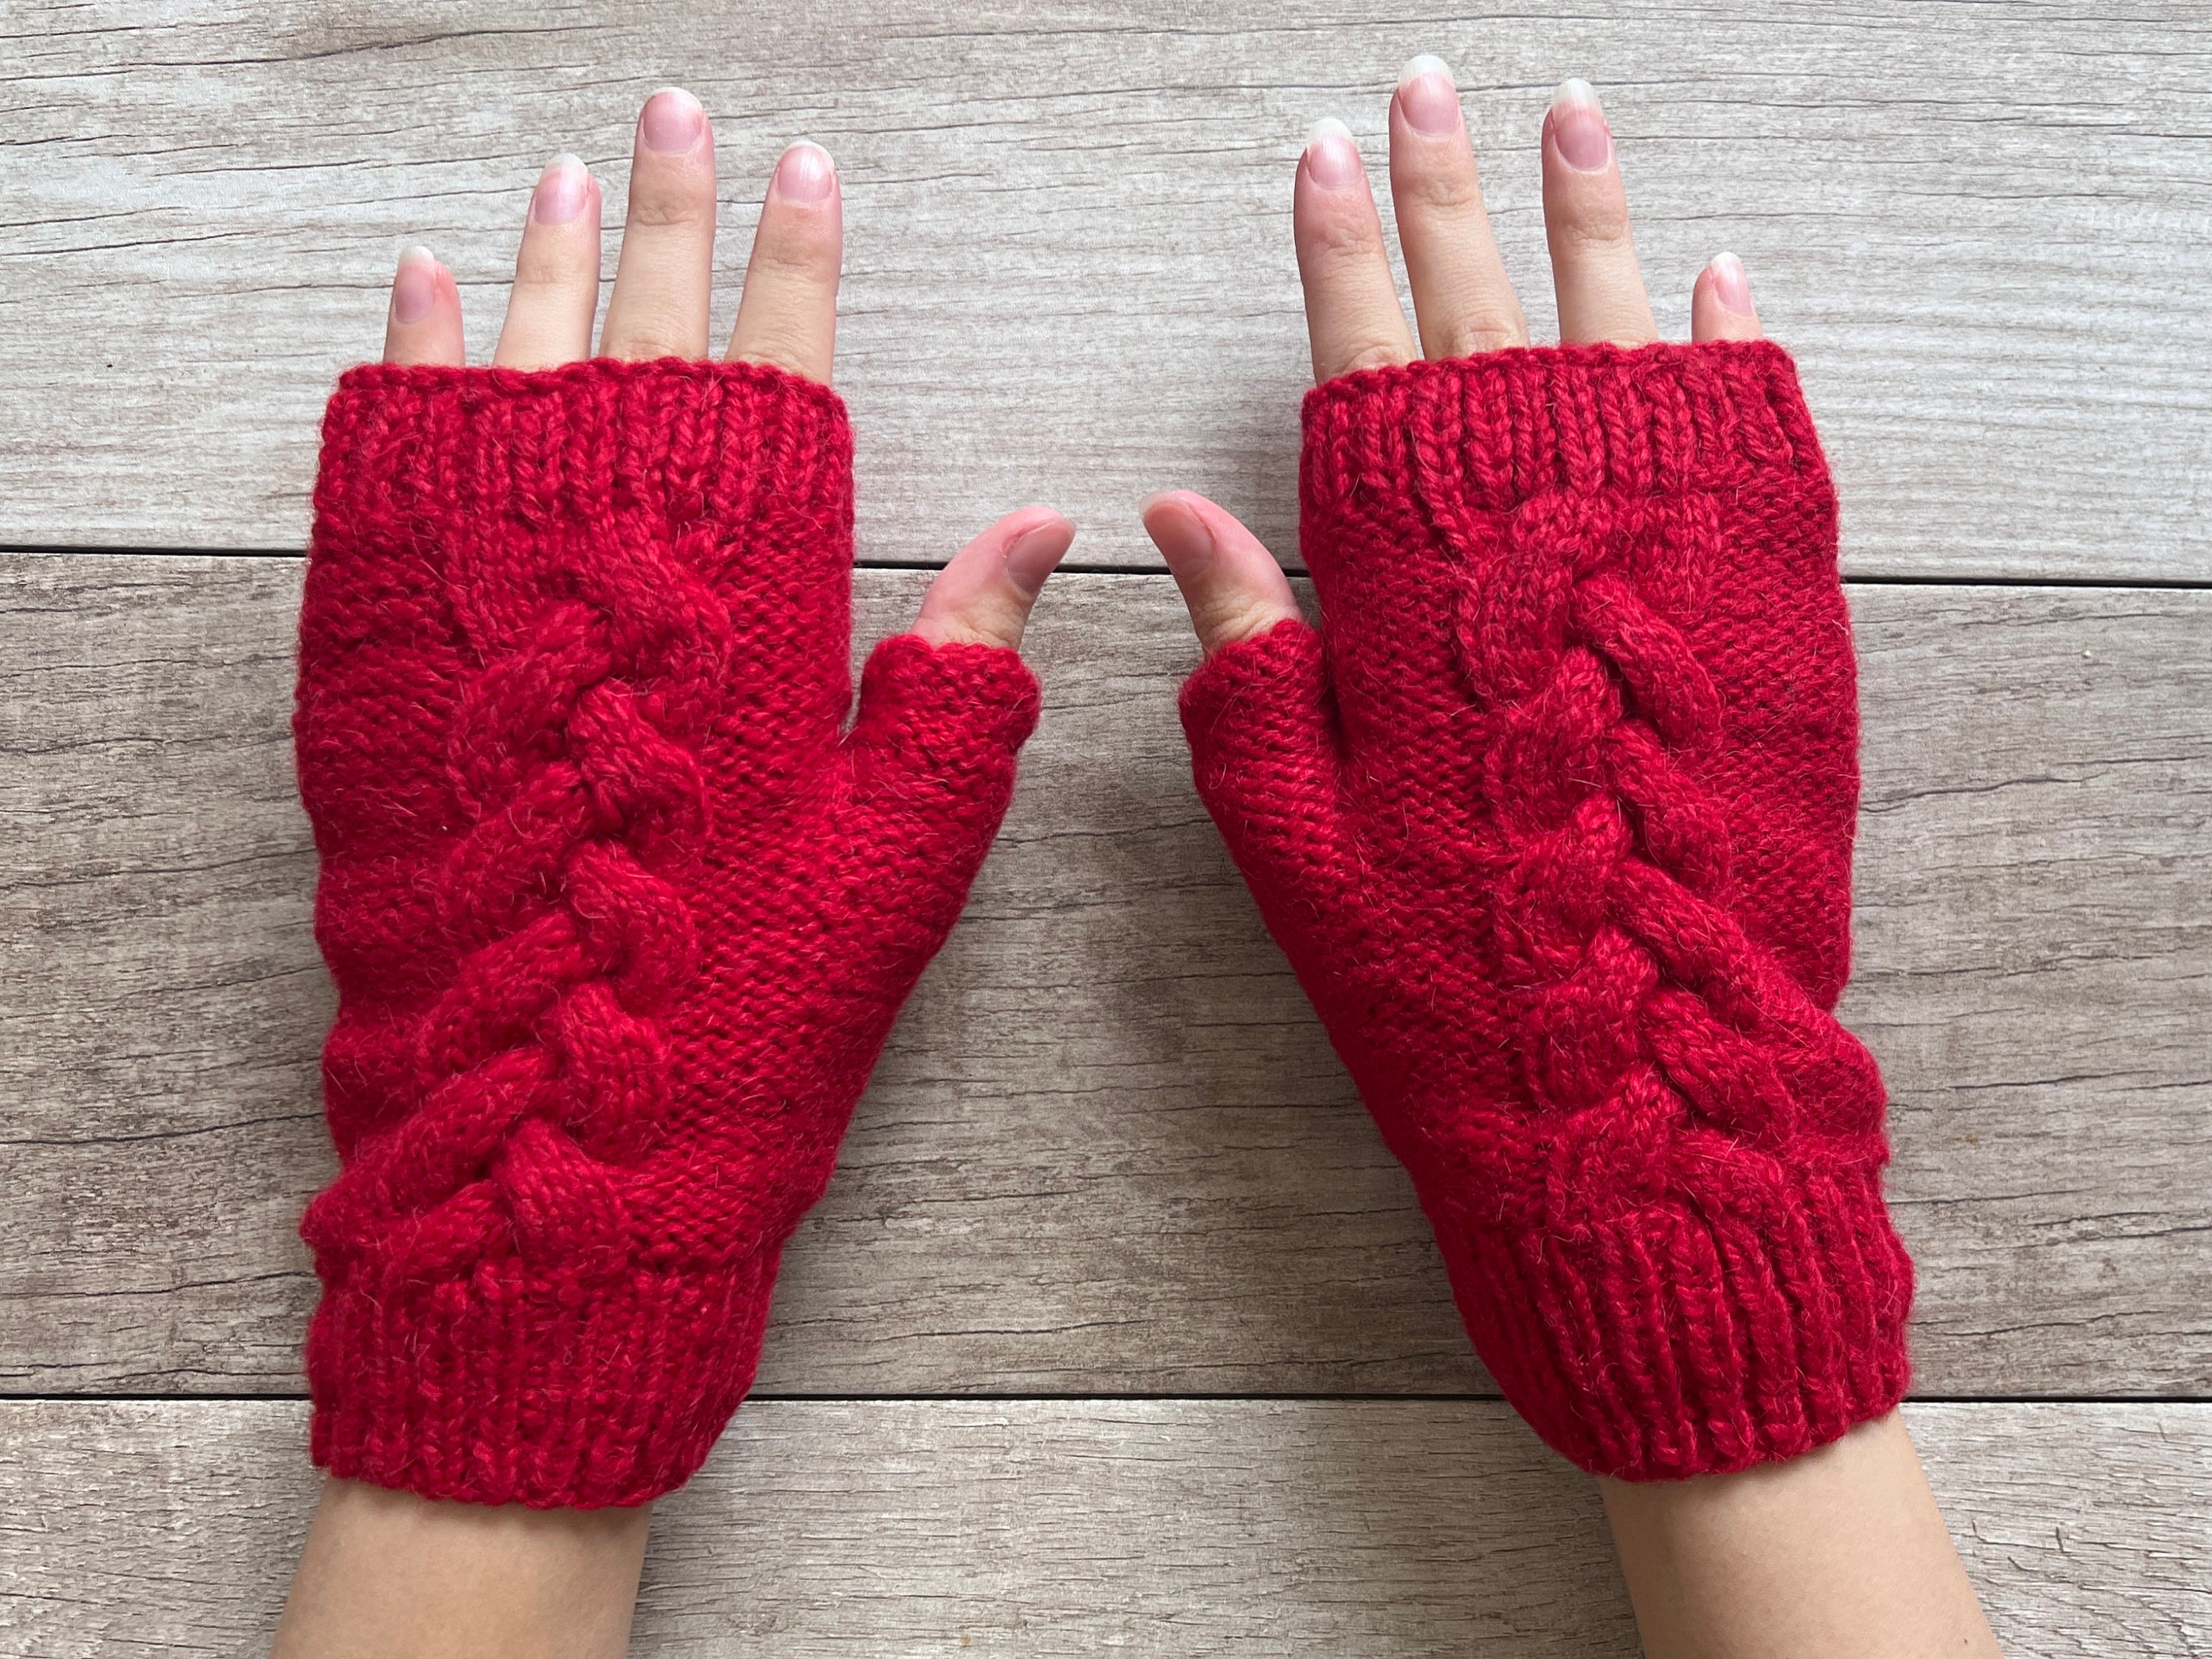 Knit Gloves,Women Convertible Glove Winter Gloves Ladies Half Finger Mittens Winter Warm Gloves for Outdoor Cycling Climbing Hiking Best Christmas Gifts for Girl&Men 